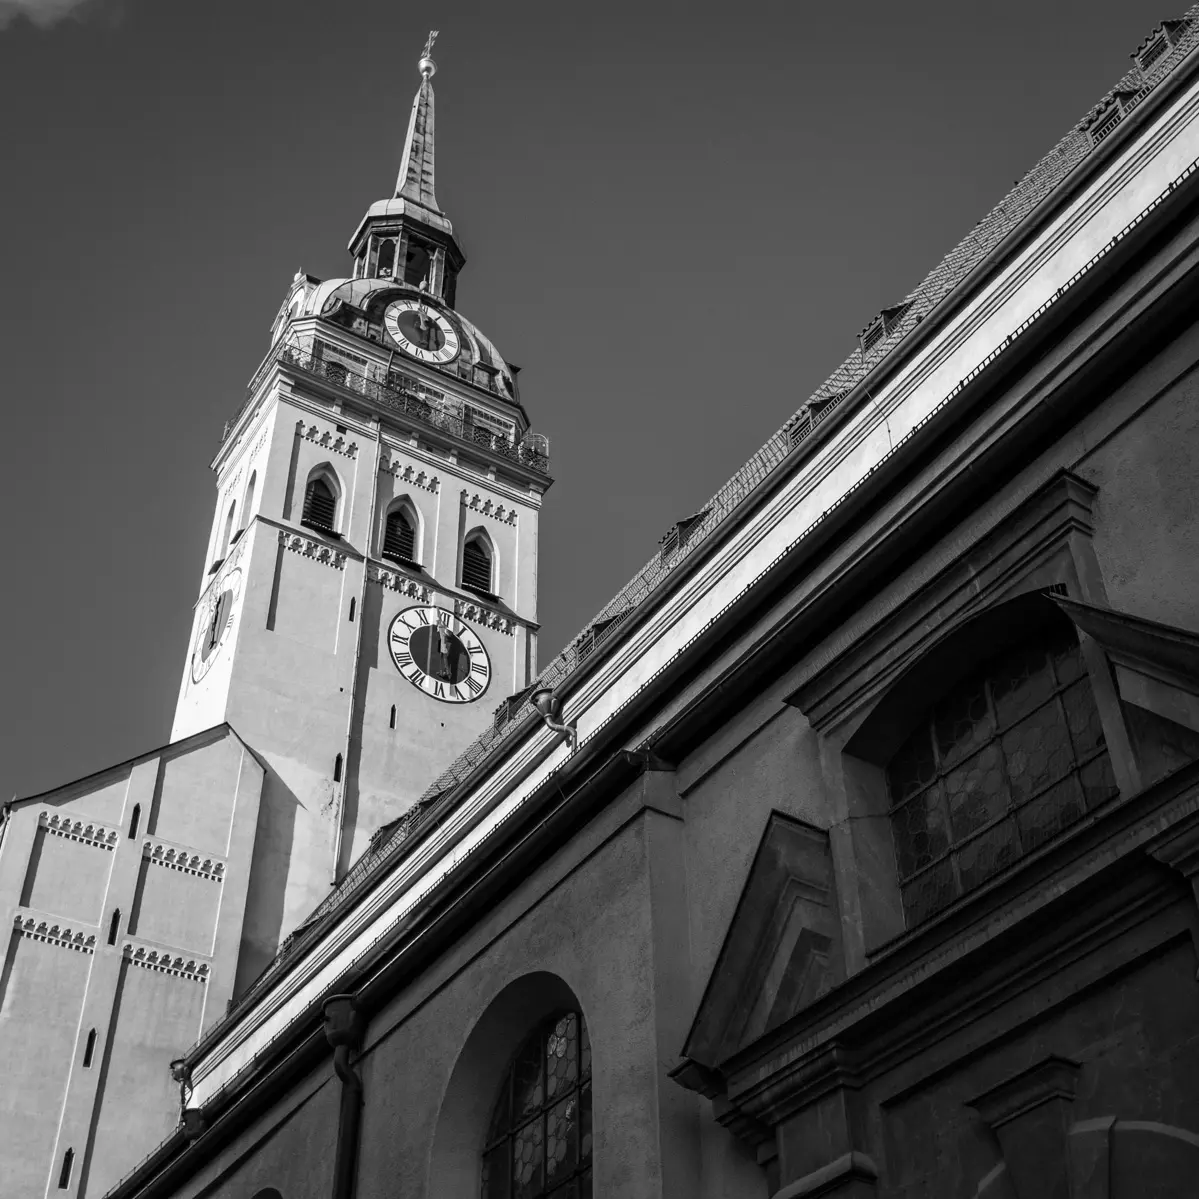 A monochromatic photograph of church architecture in Munich, Germany.